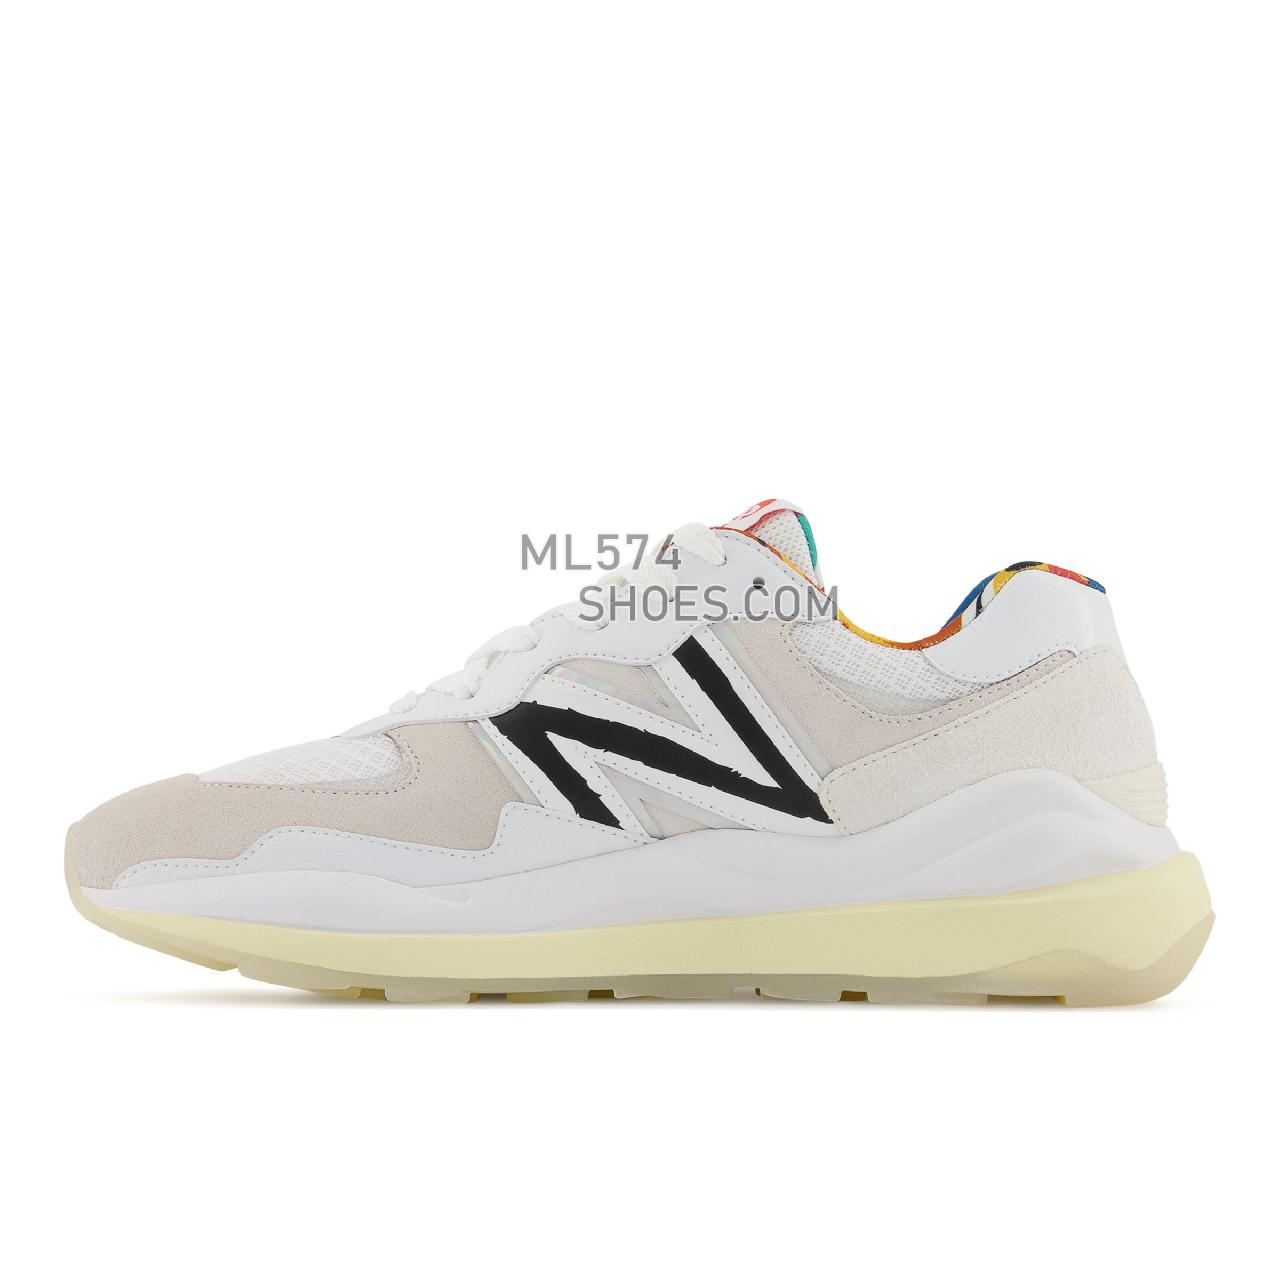 New Balance 57/40 - Men's Sport Style Sneakers - Nb White with Vanilla and Black - M5740PR1